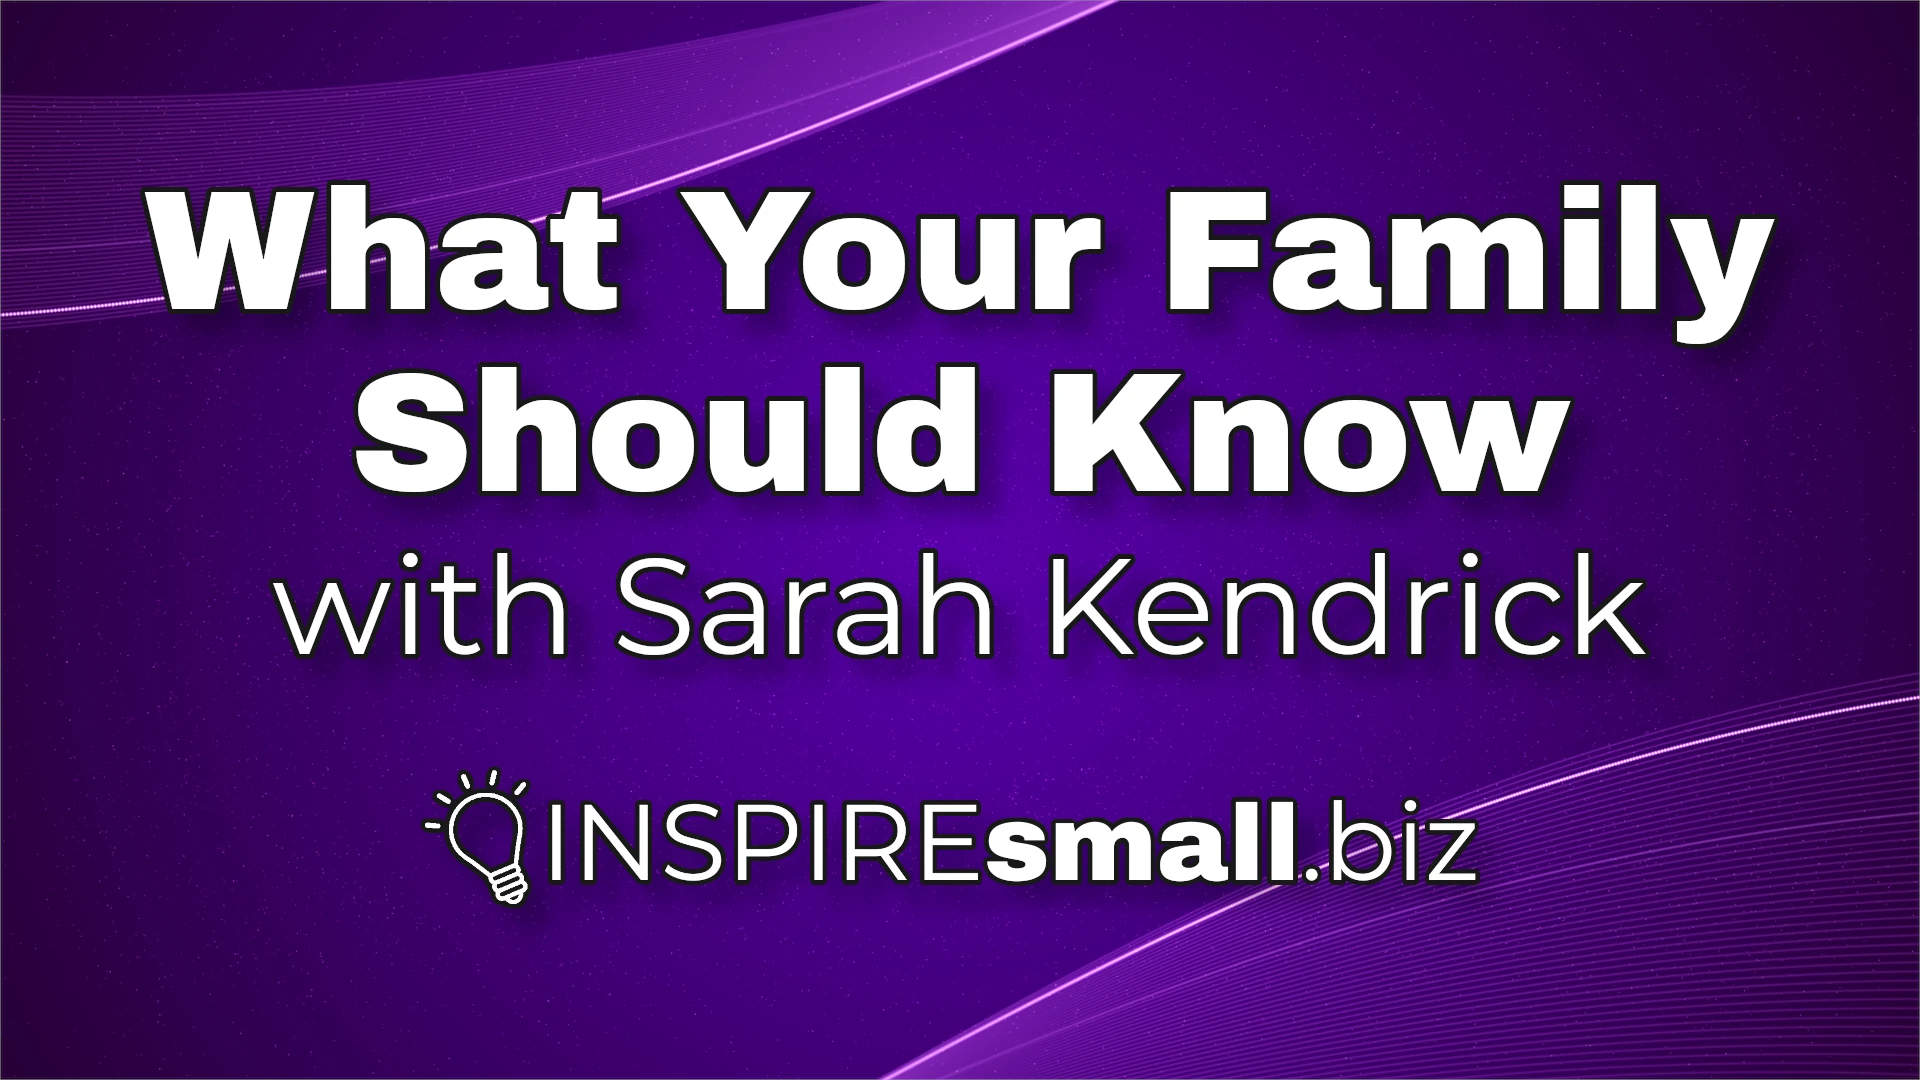 What Your Family Should Know